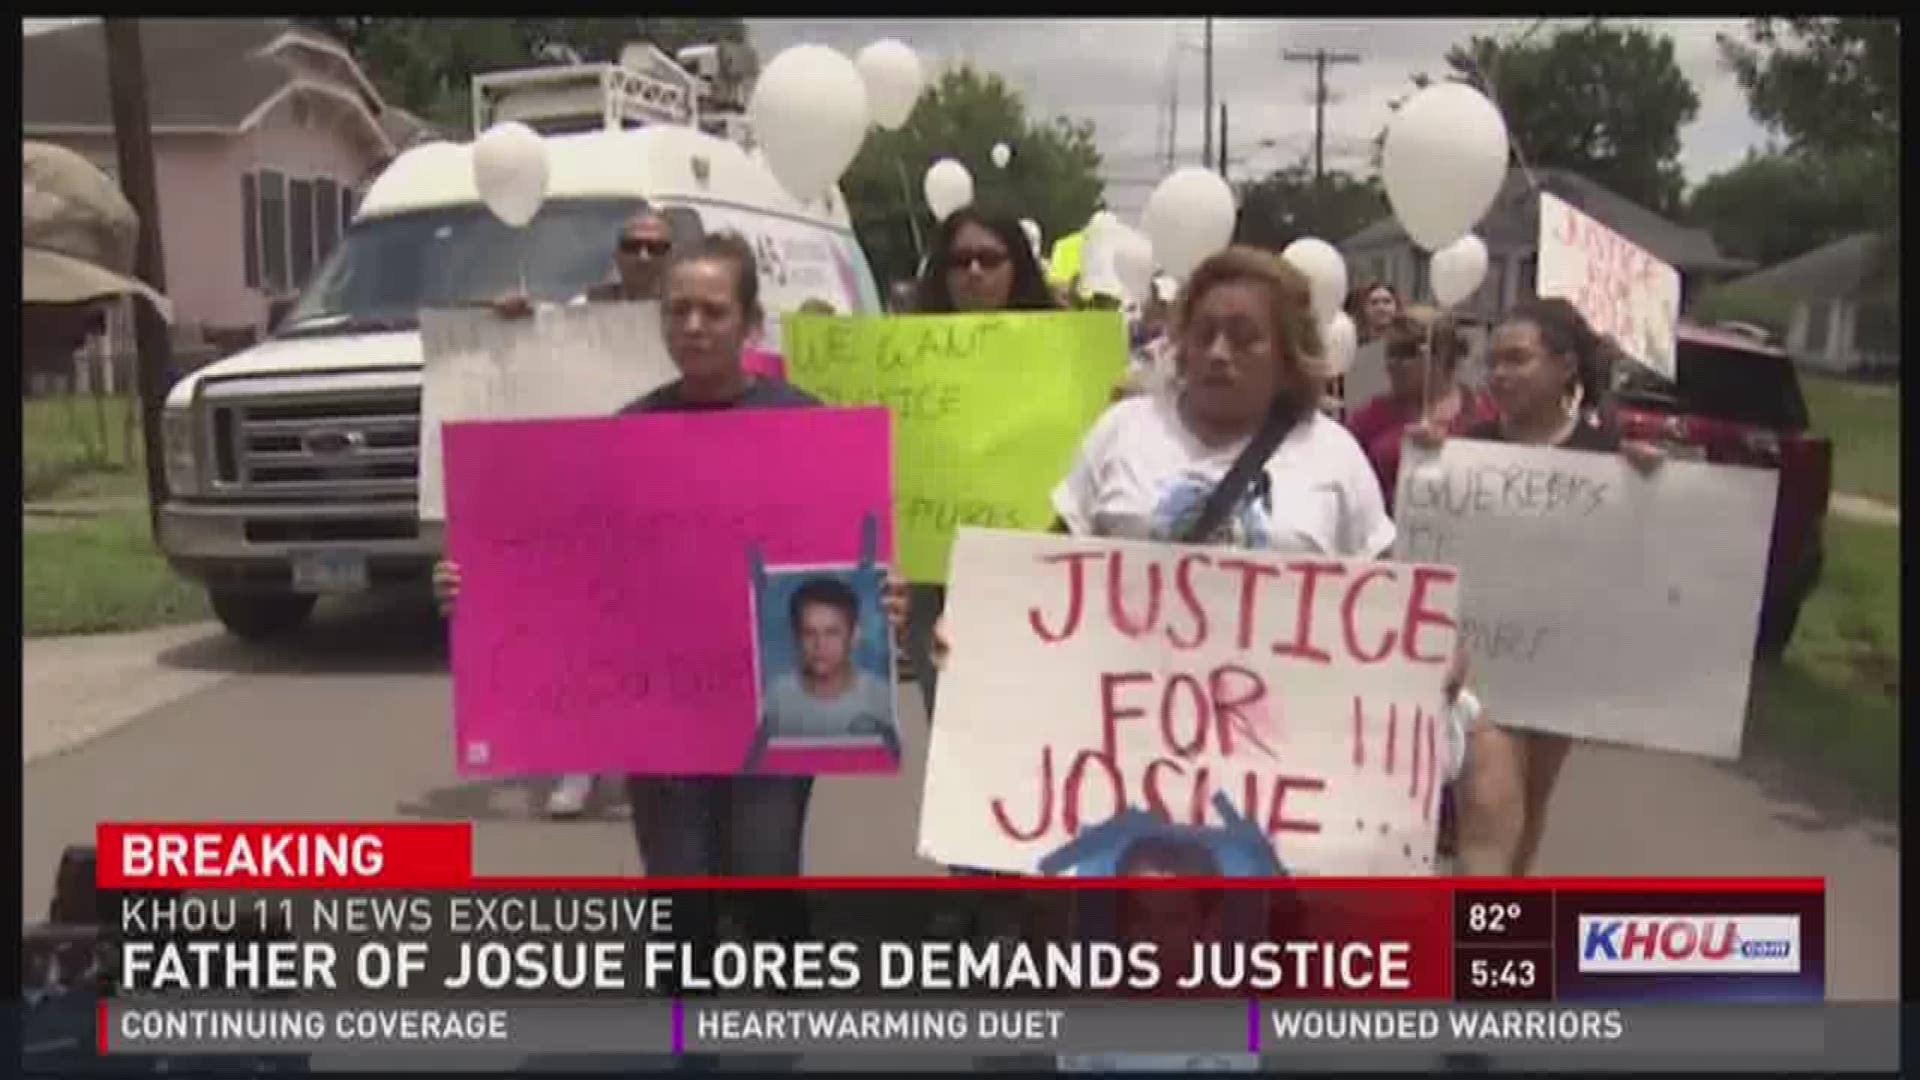 Family and friends of Josue Flores marched on Sunday in an effort to bring justice and change after the 11 year old boy was brutally stabbed to death last week. 